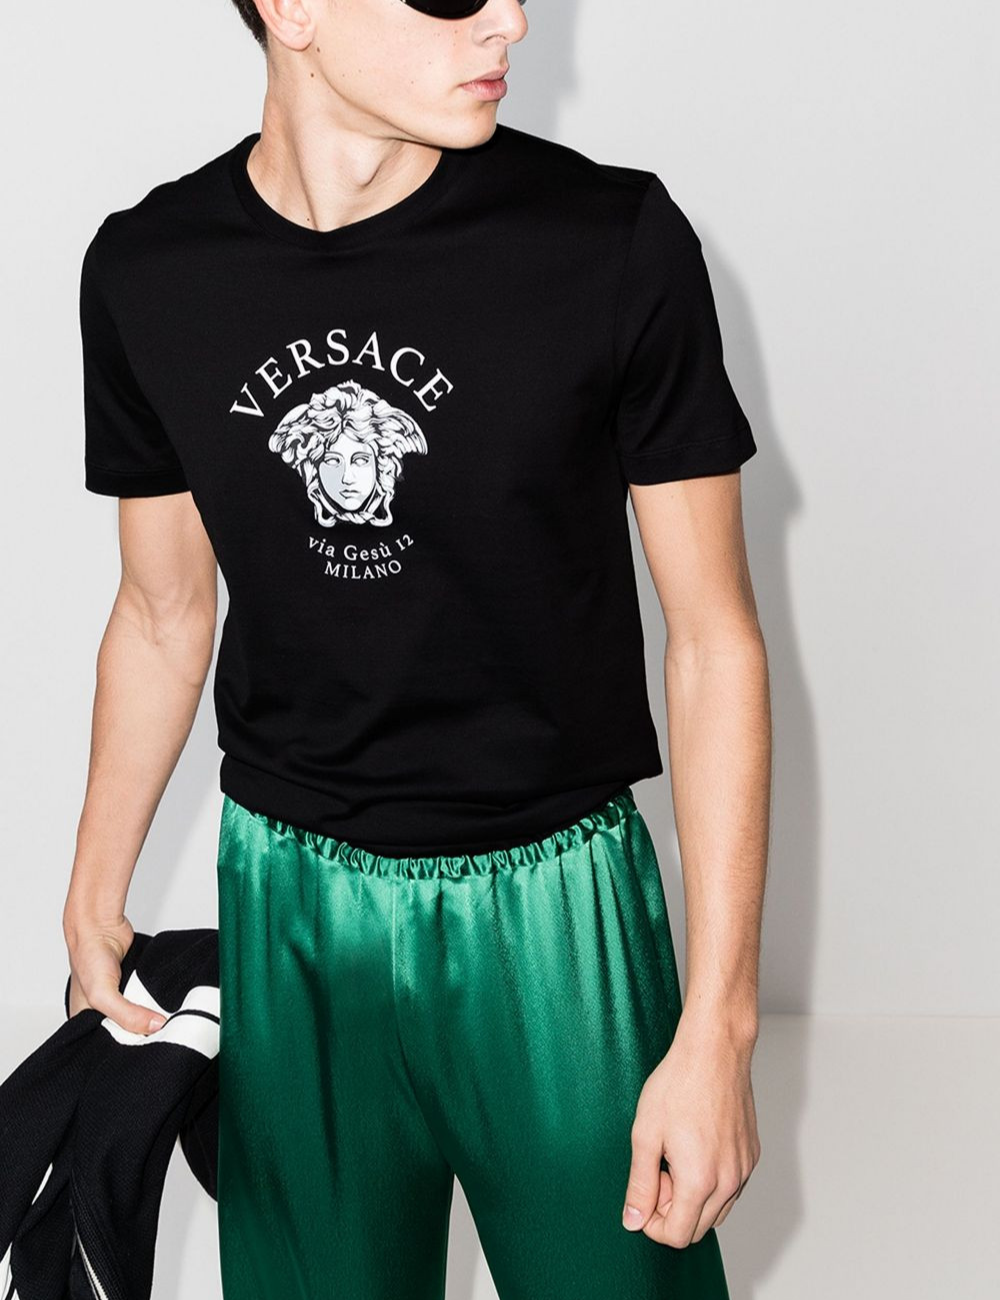 Versace Medusa Head logo T-shirt - Shop Streetwear, Sneakers, Slippers and Gifts online | Malaysia - The Factory KL